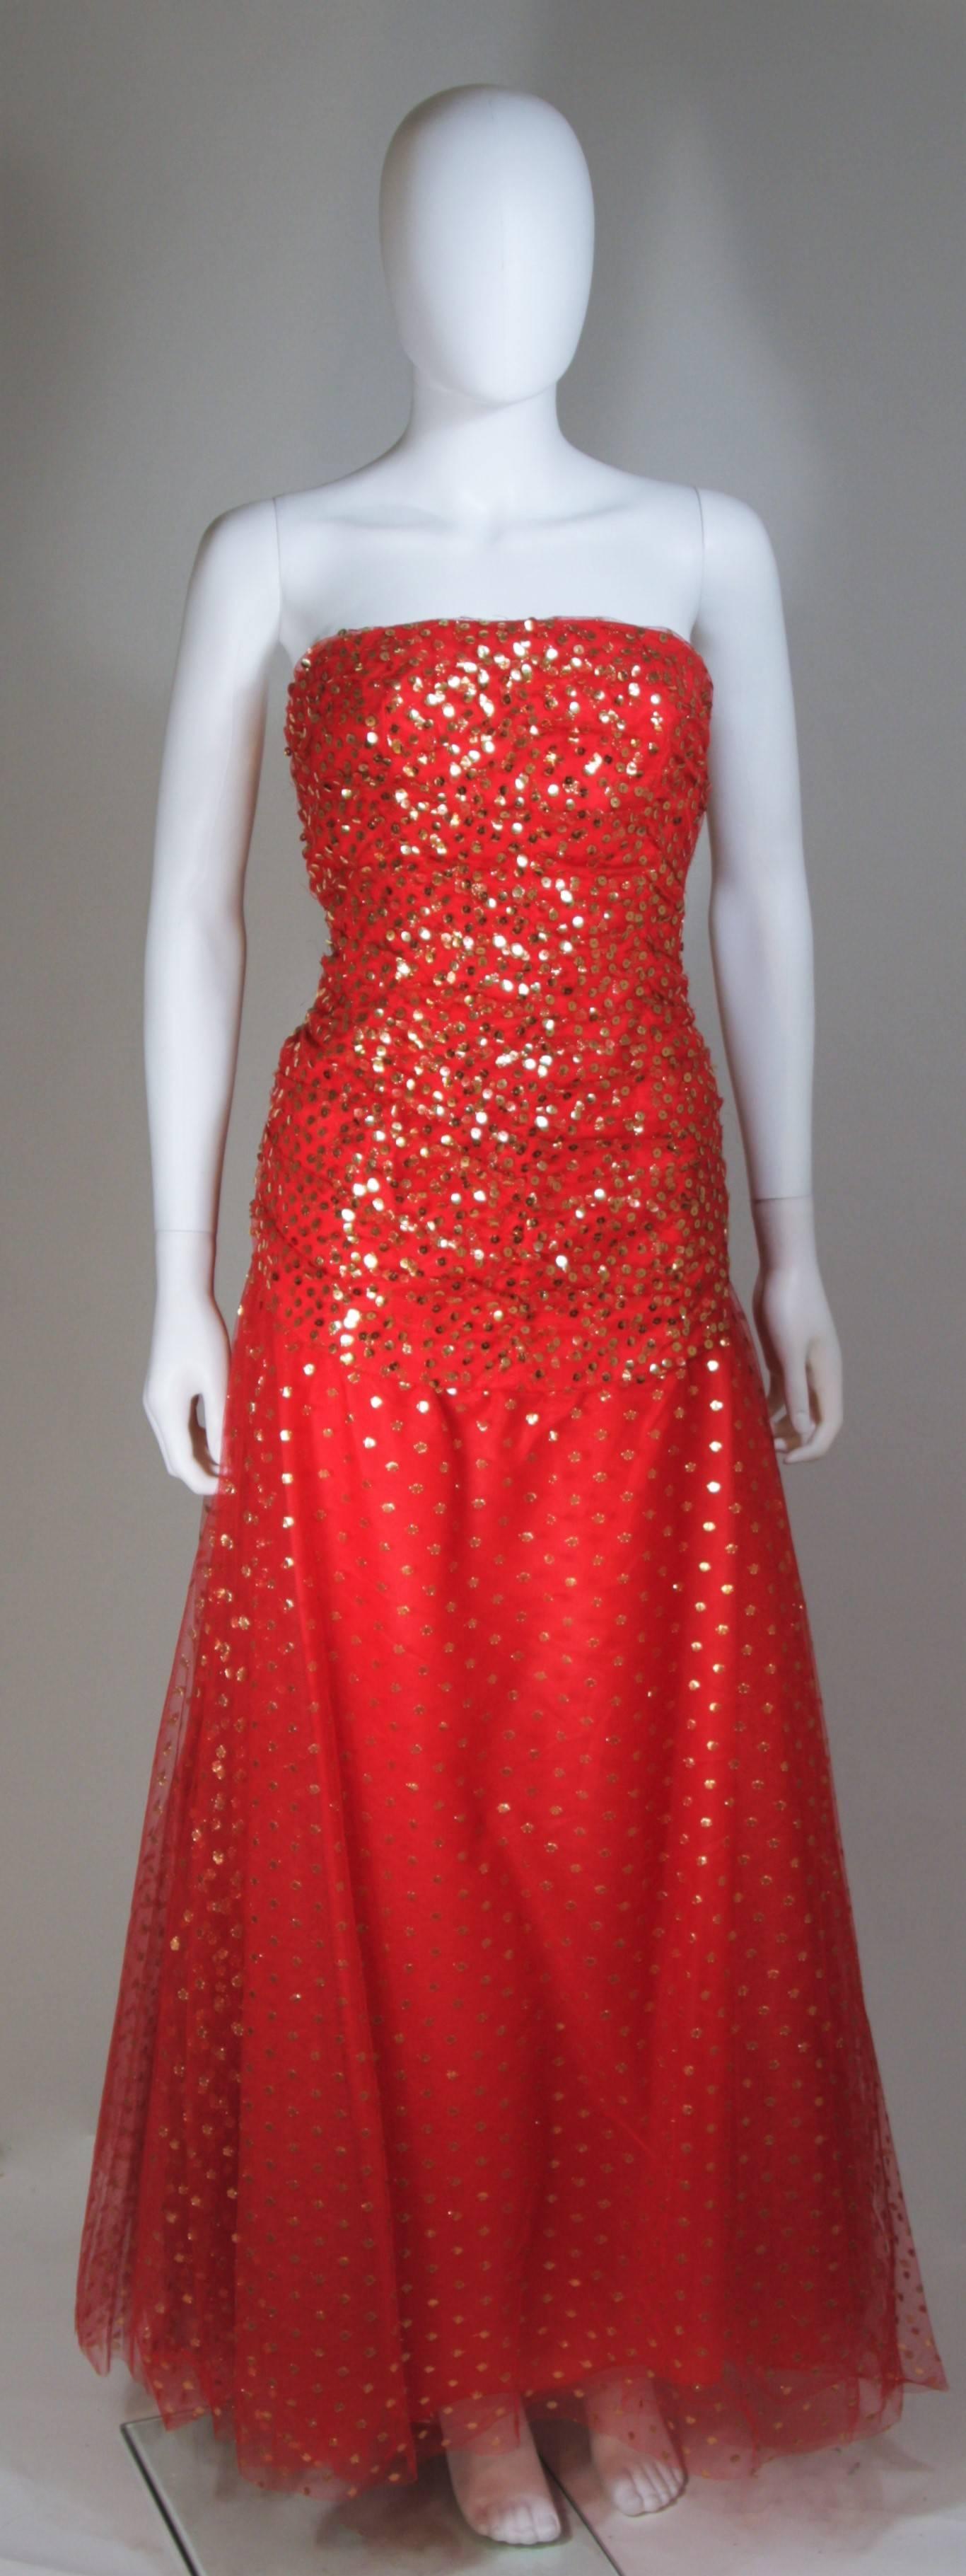  This Victor Costa  gown is composed of layered red mesh and is adorned with gold sequins. Features a ruched bodice with center back zipper closure. In excellent vintage condition. 

  **Please cross-reference measurements for personal accuracy.